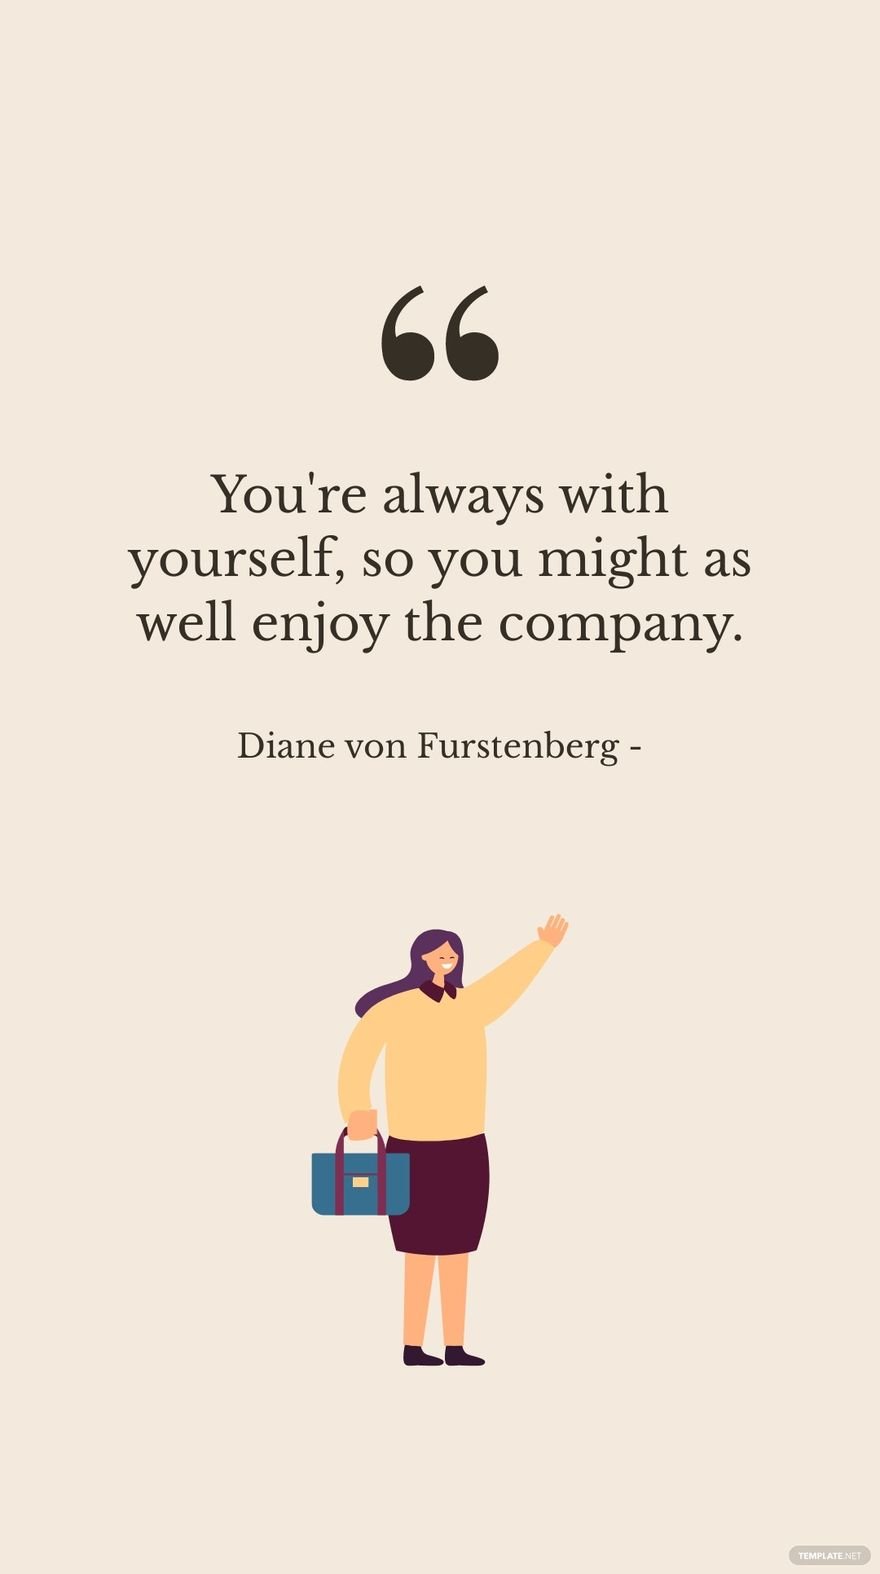 Free Diane von Furstenberg - You're always with yourself, so you might as well enjoy the company.